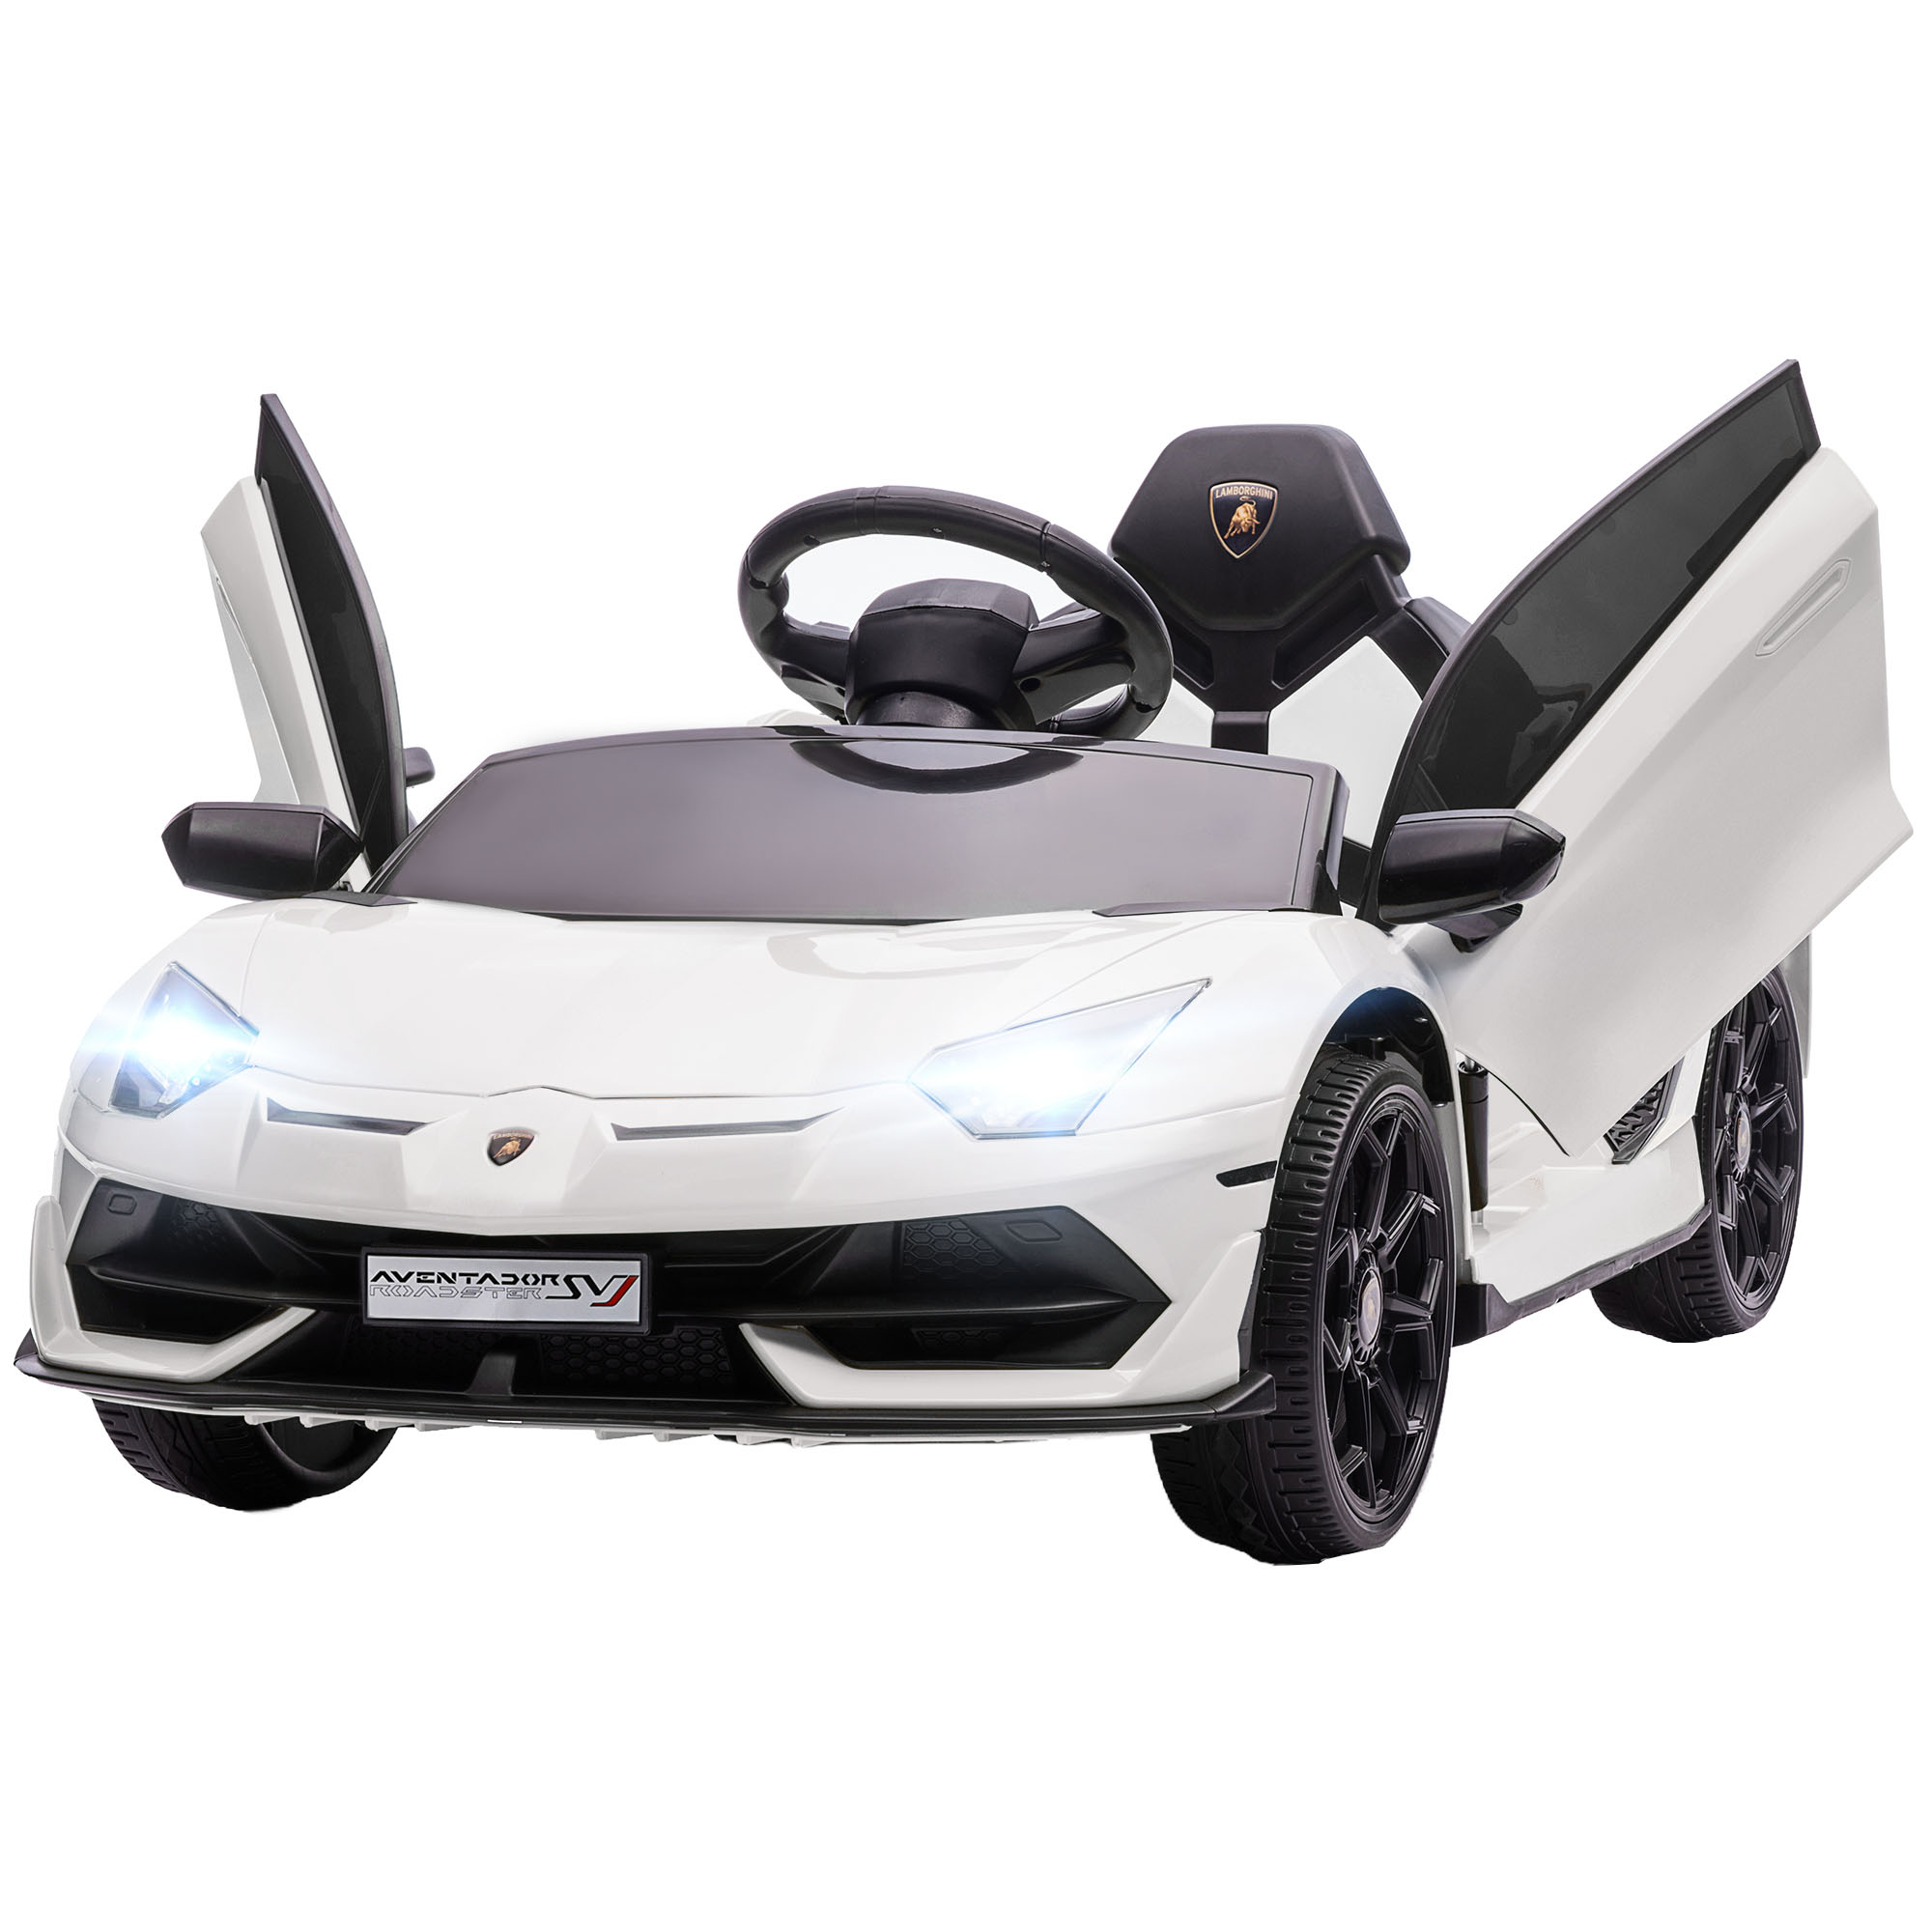 HOMCOM 12V Lamborghini Licenseded Electric Ride-On Toy Car for Children with Horn and Remote Control